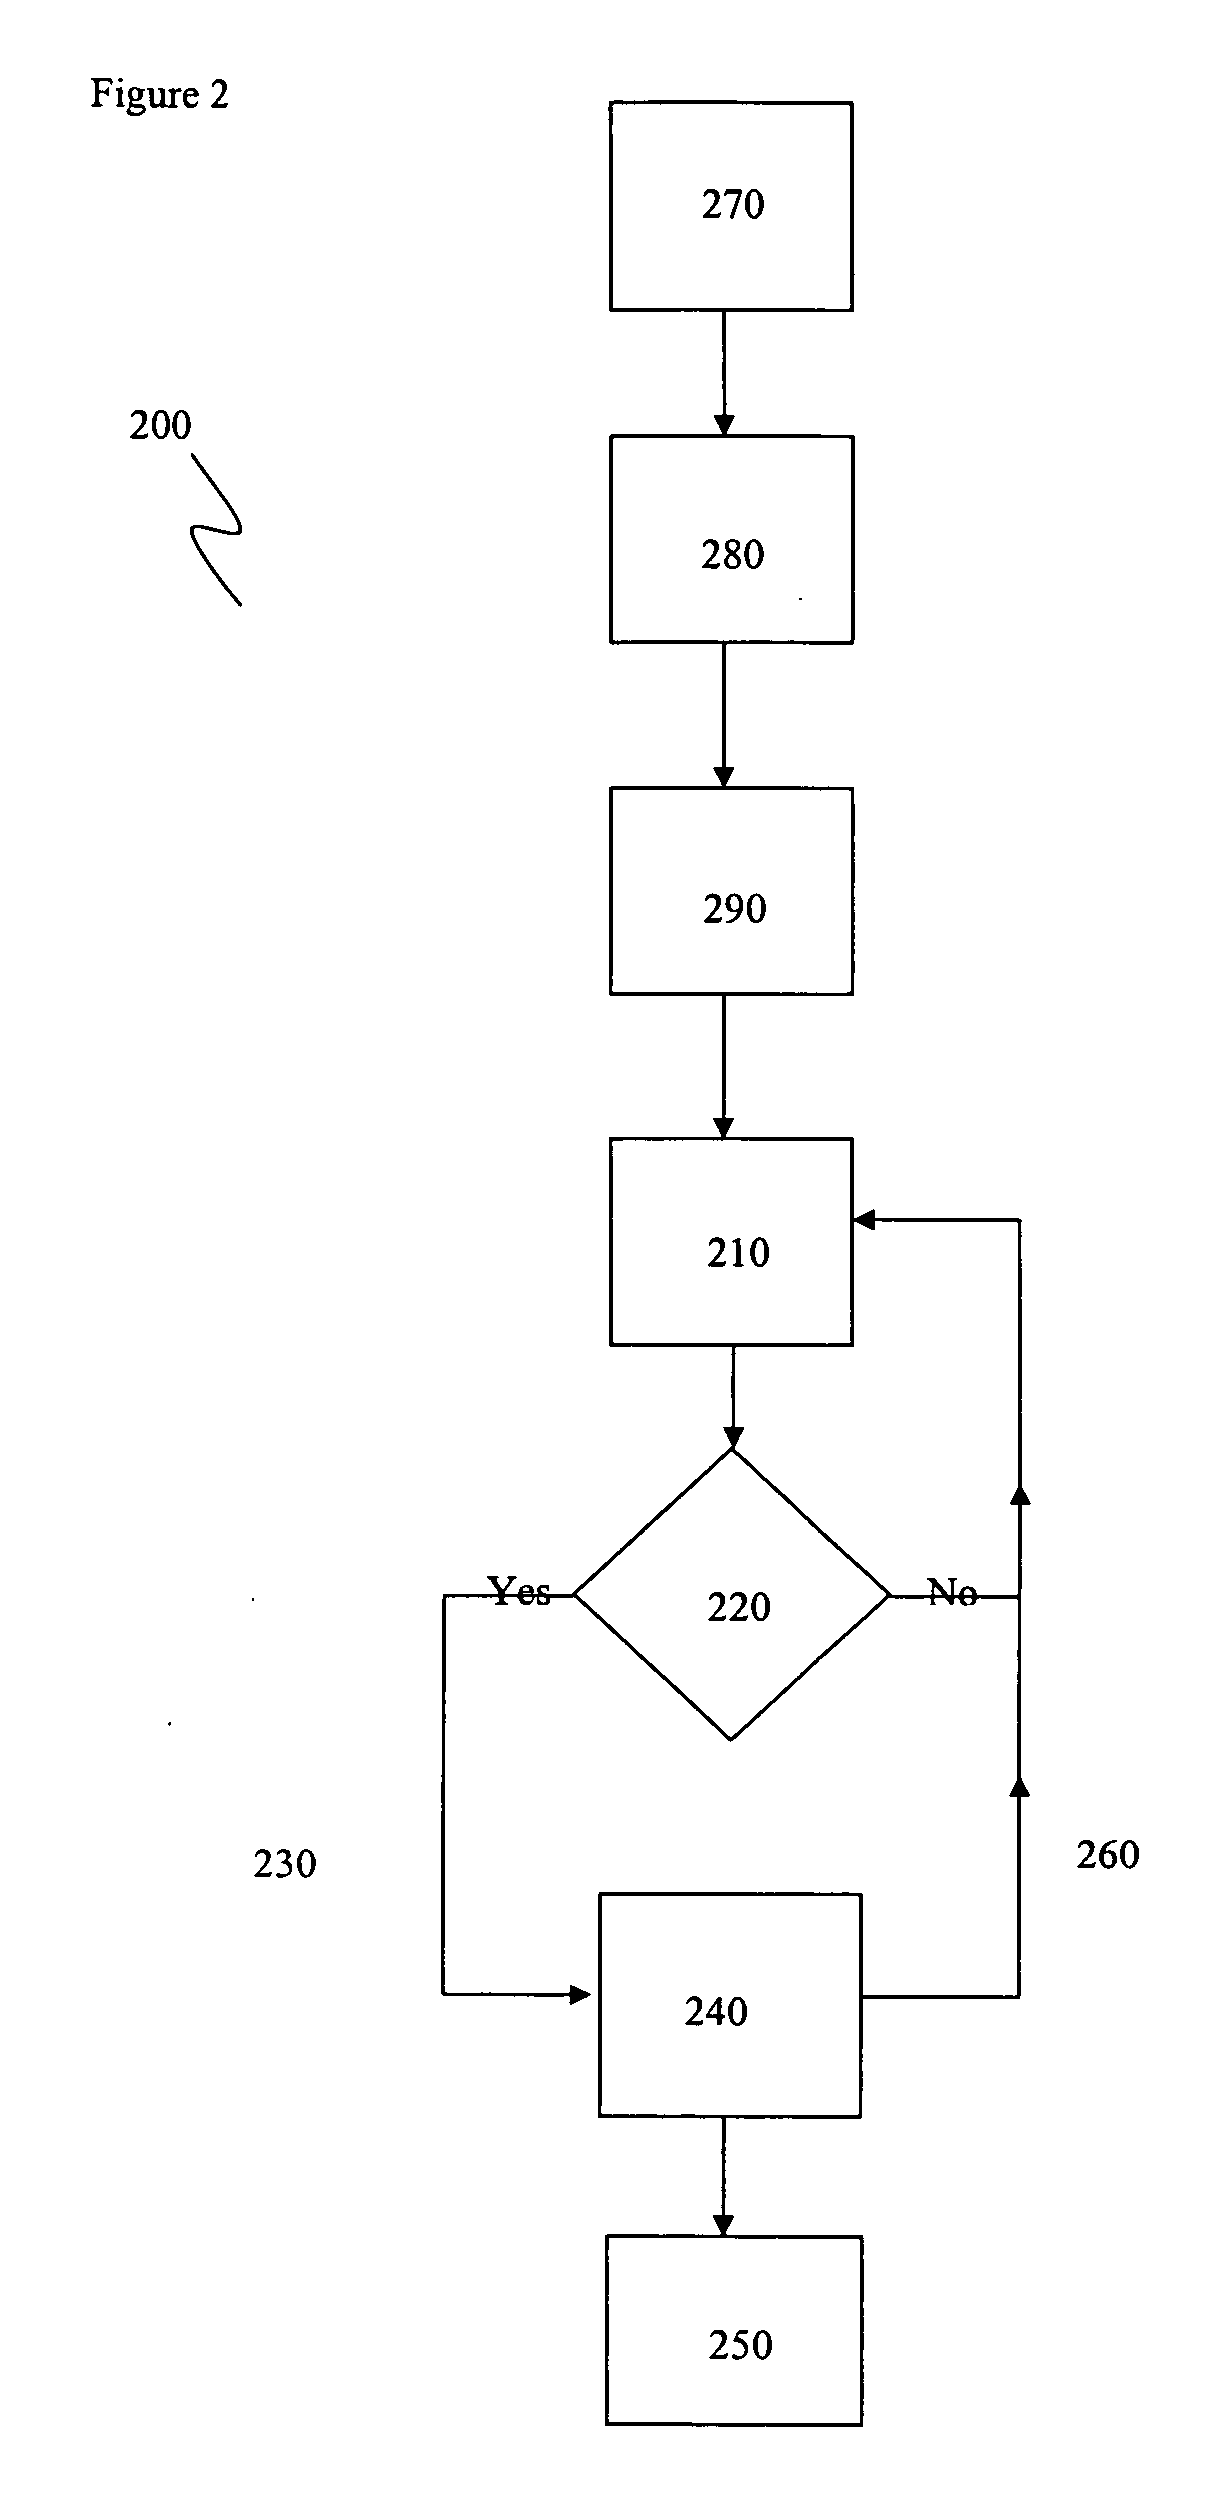 Apparatus and method for modulating neurochemical levels in the brain